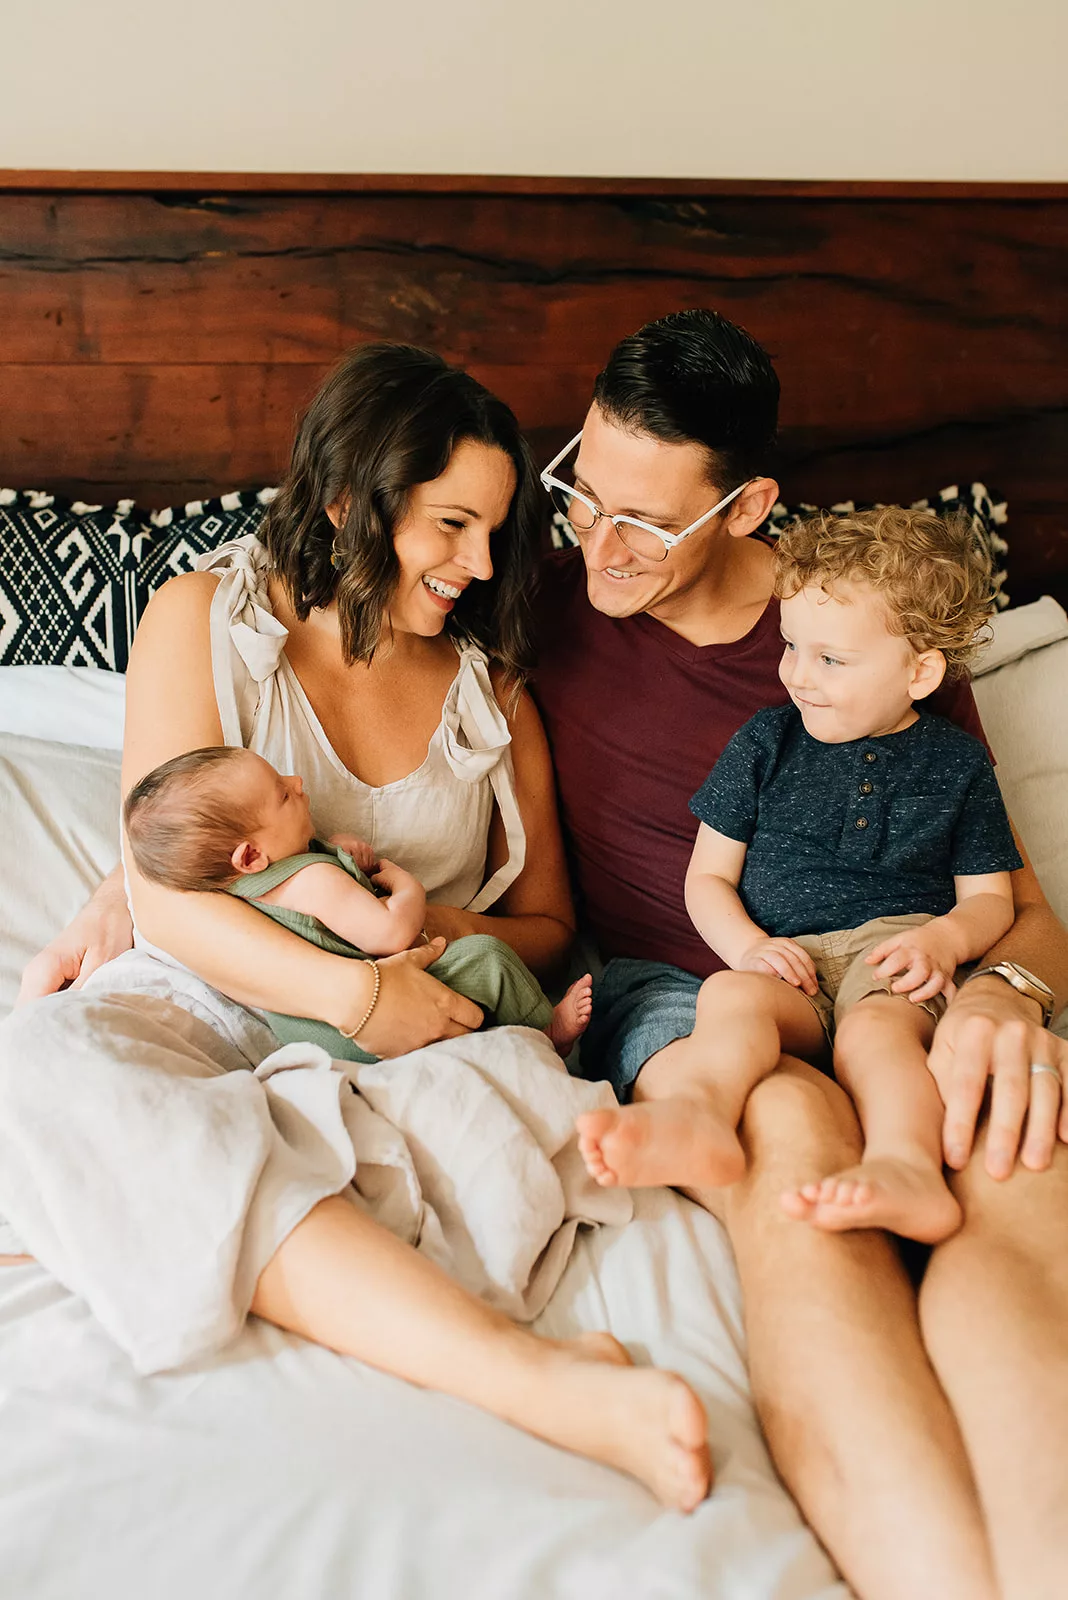 A family of four sit together on a bed together smiling with the newborn baby